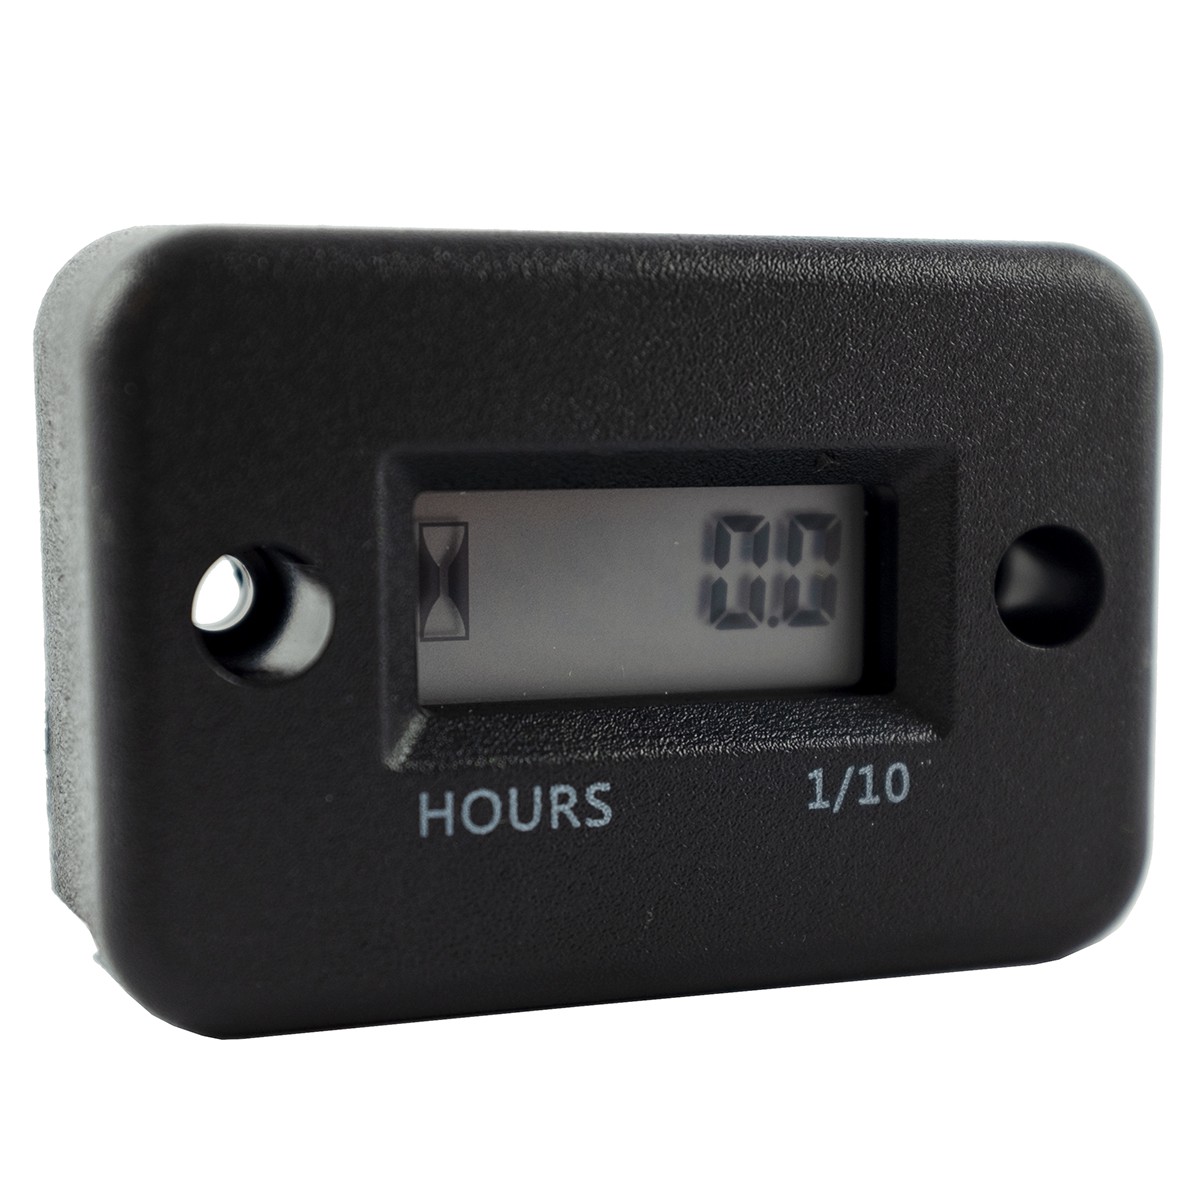 Hour meter, electronic, universal work time counter